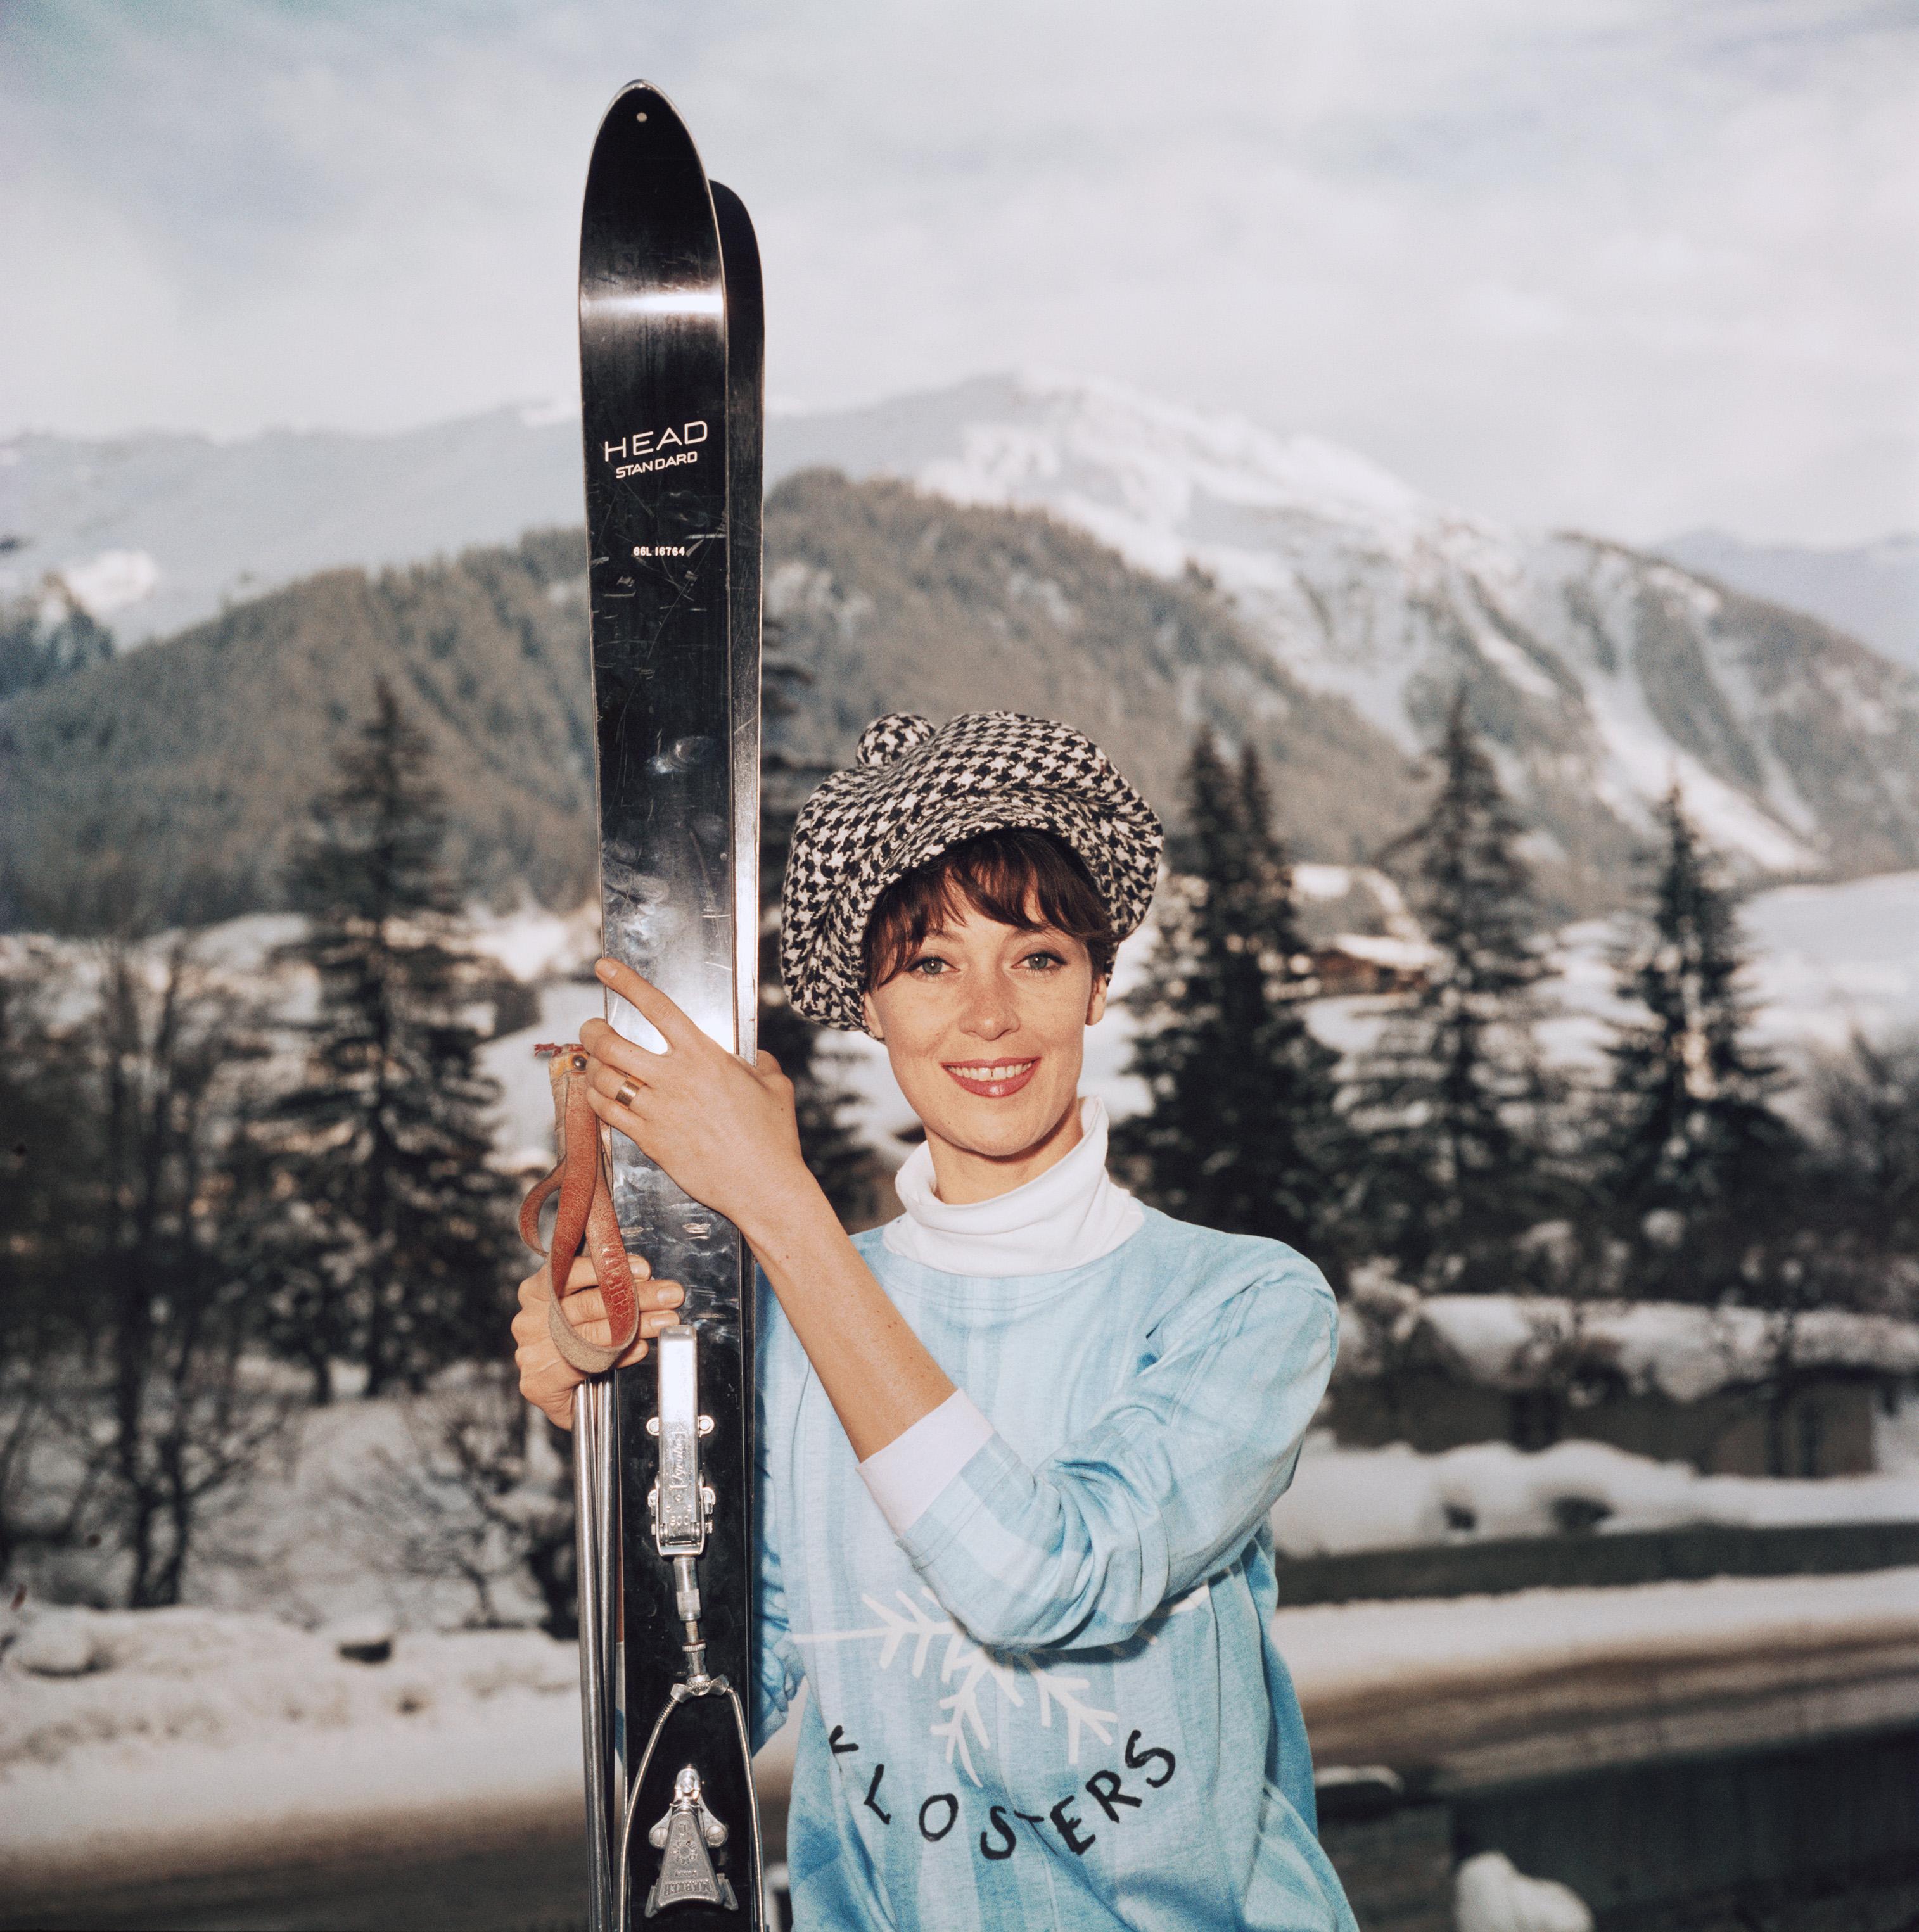 1963: Model Barbara Mullen skiing in Klosters, Switzerland.

Slim Aarons Estate Edition, Certificate of Authenticity included
Numbered and stamped by the Slim Aarons Estate
Collector will receive the next number in the edition
Modern printing from